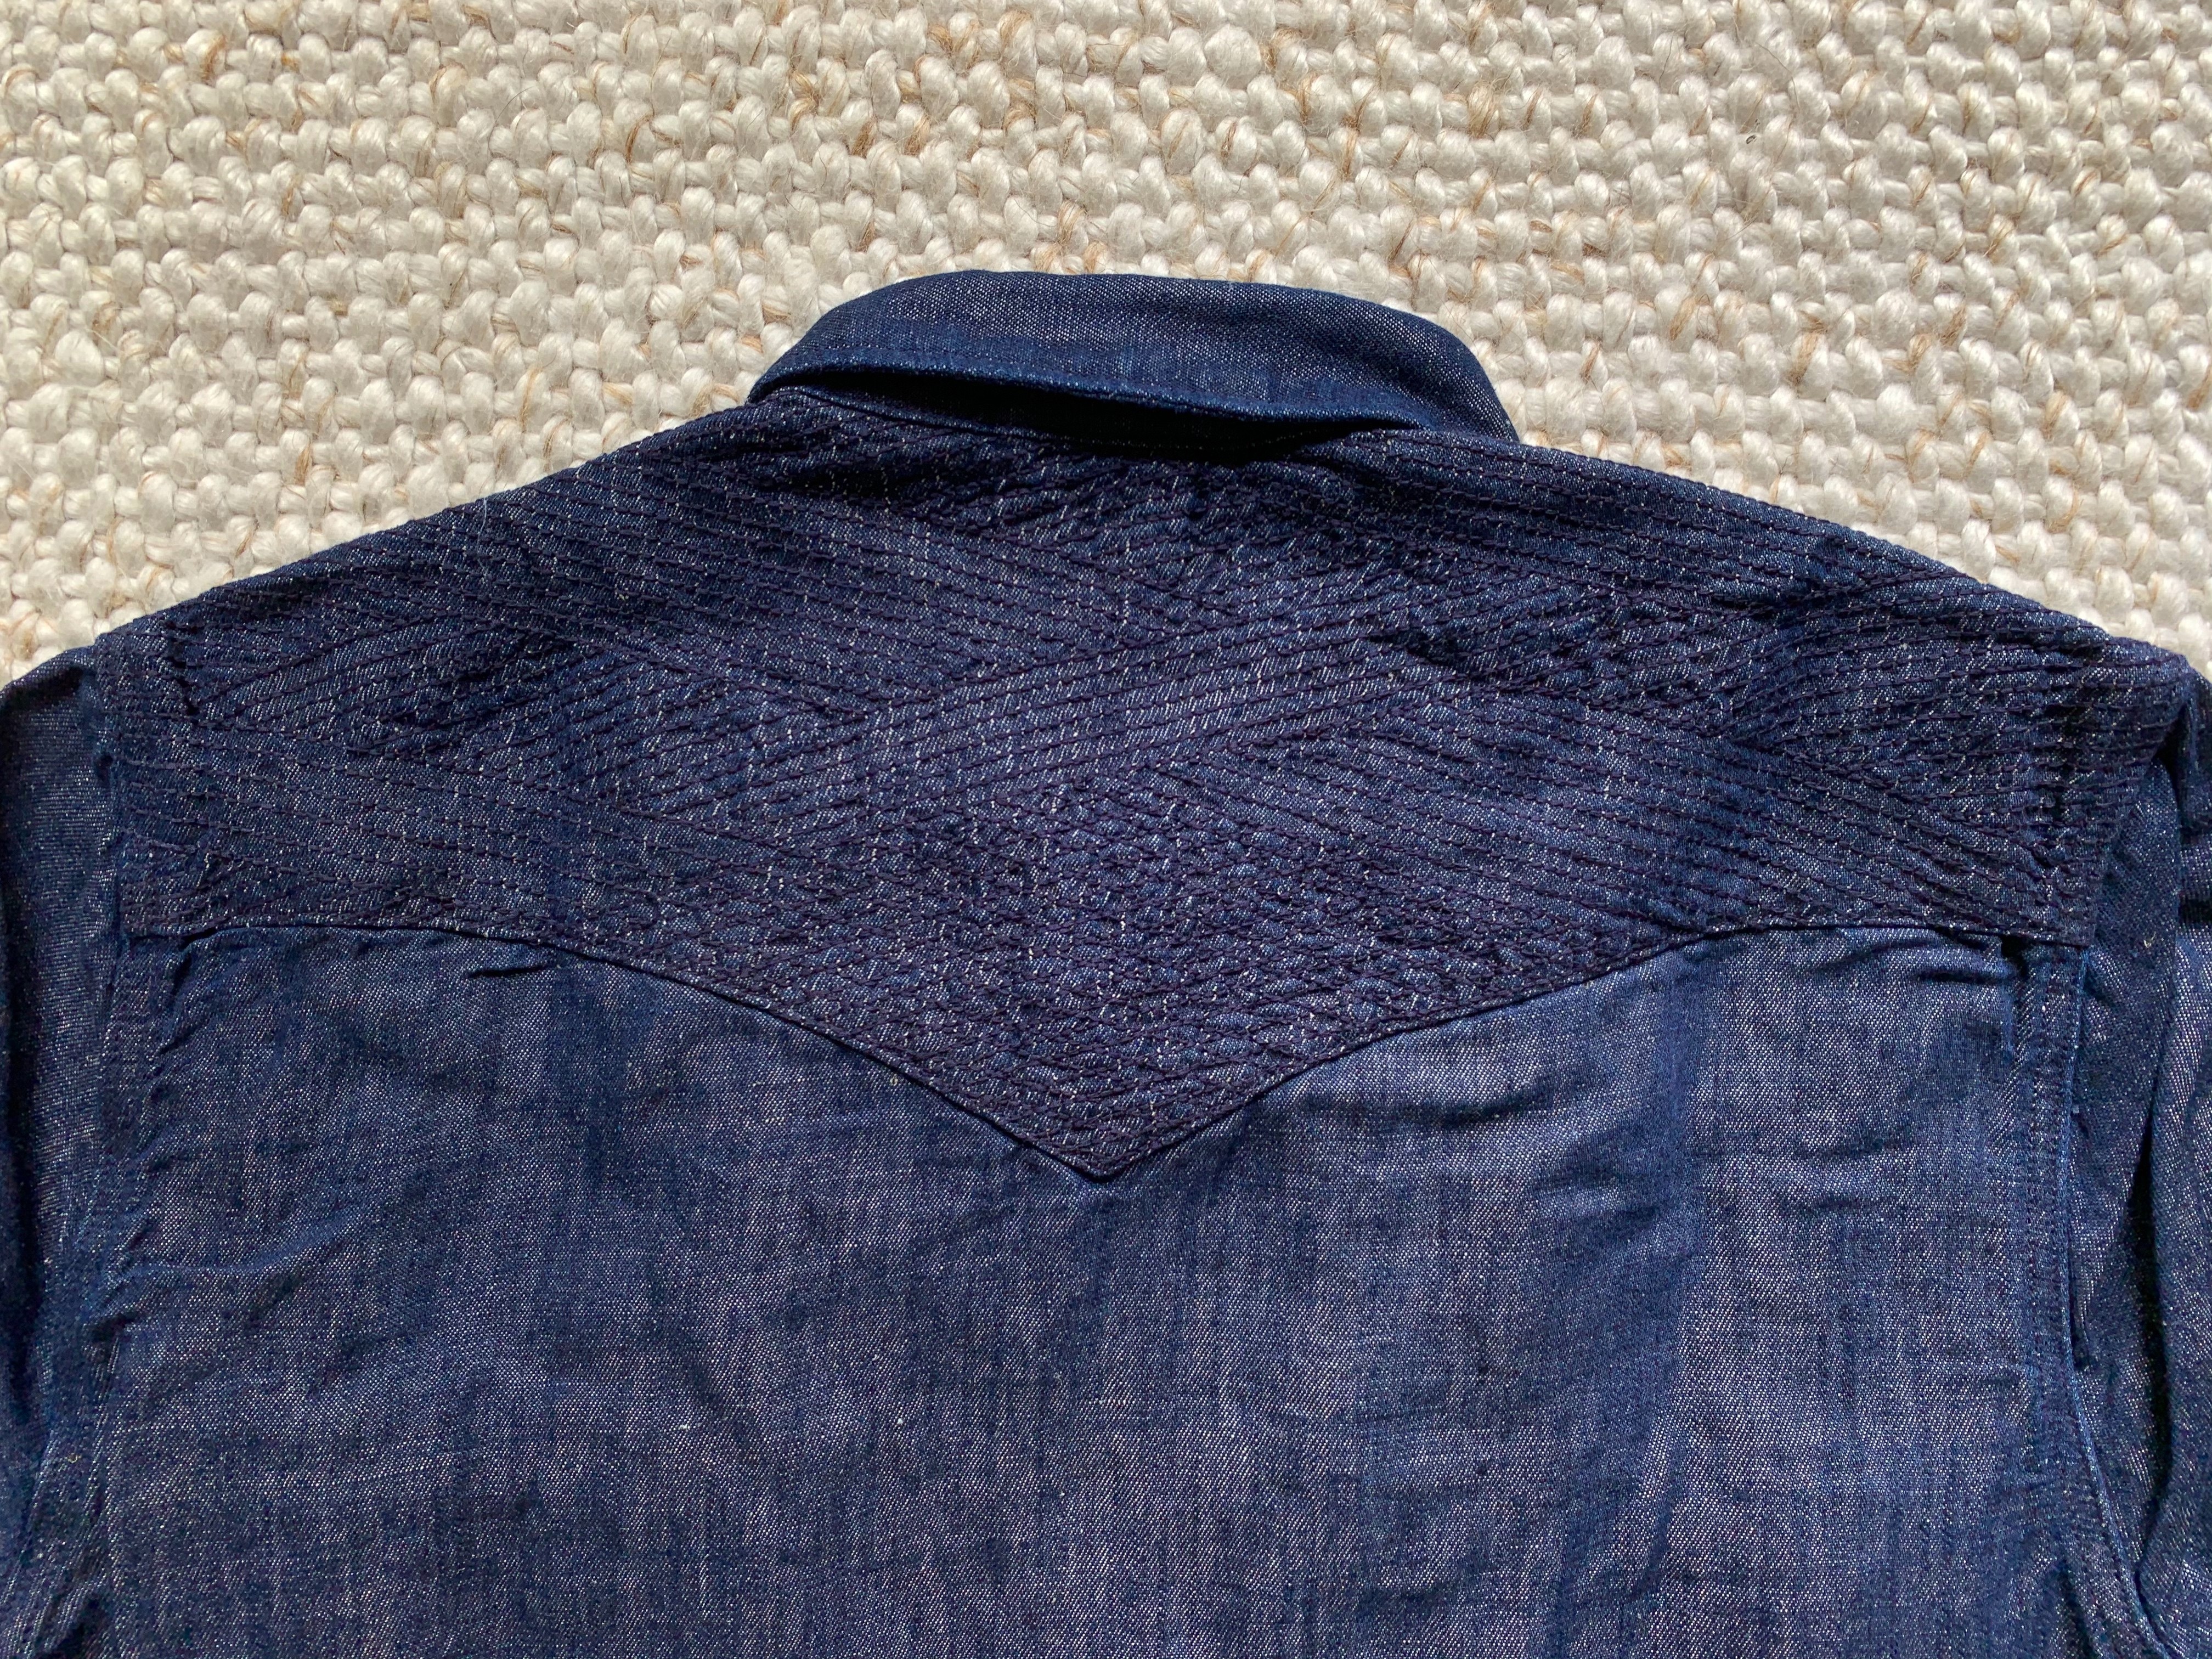 Outerknown - NWT $128 - Outerknown X Levi's Western w/ Stitched Yoke - 6